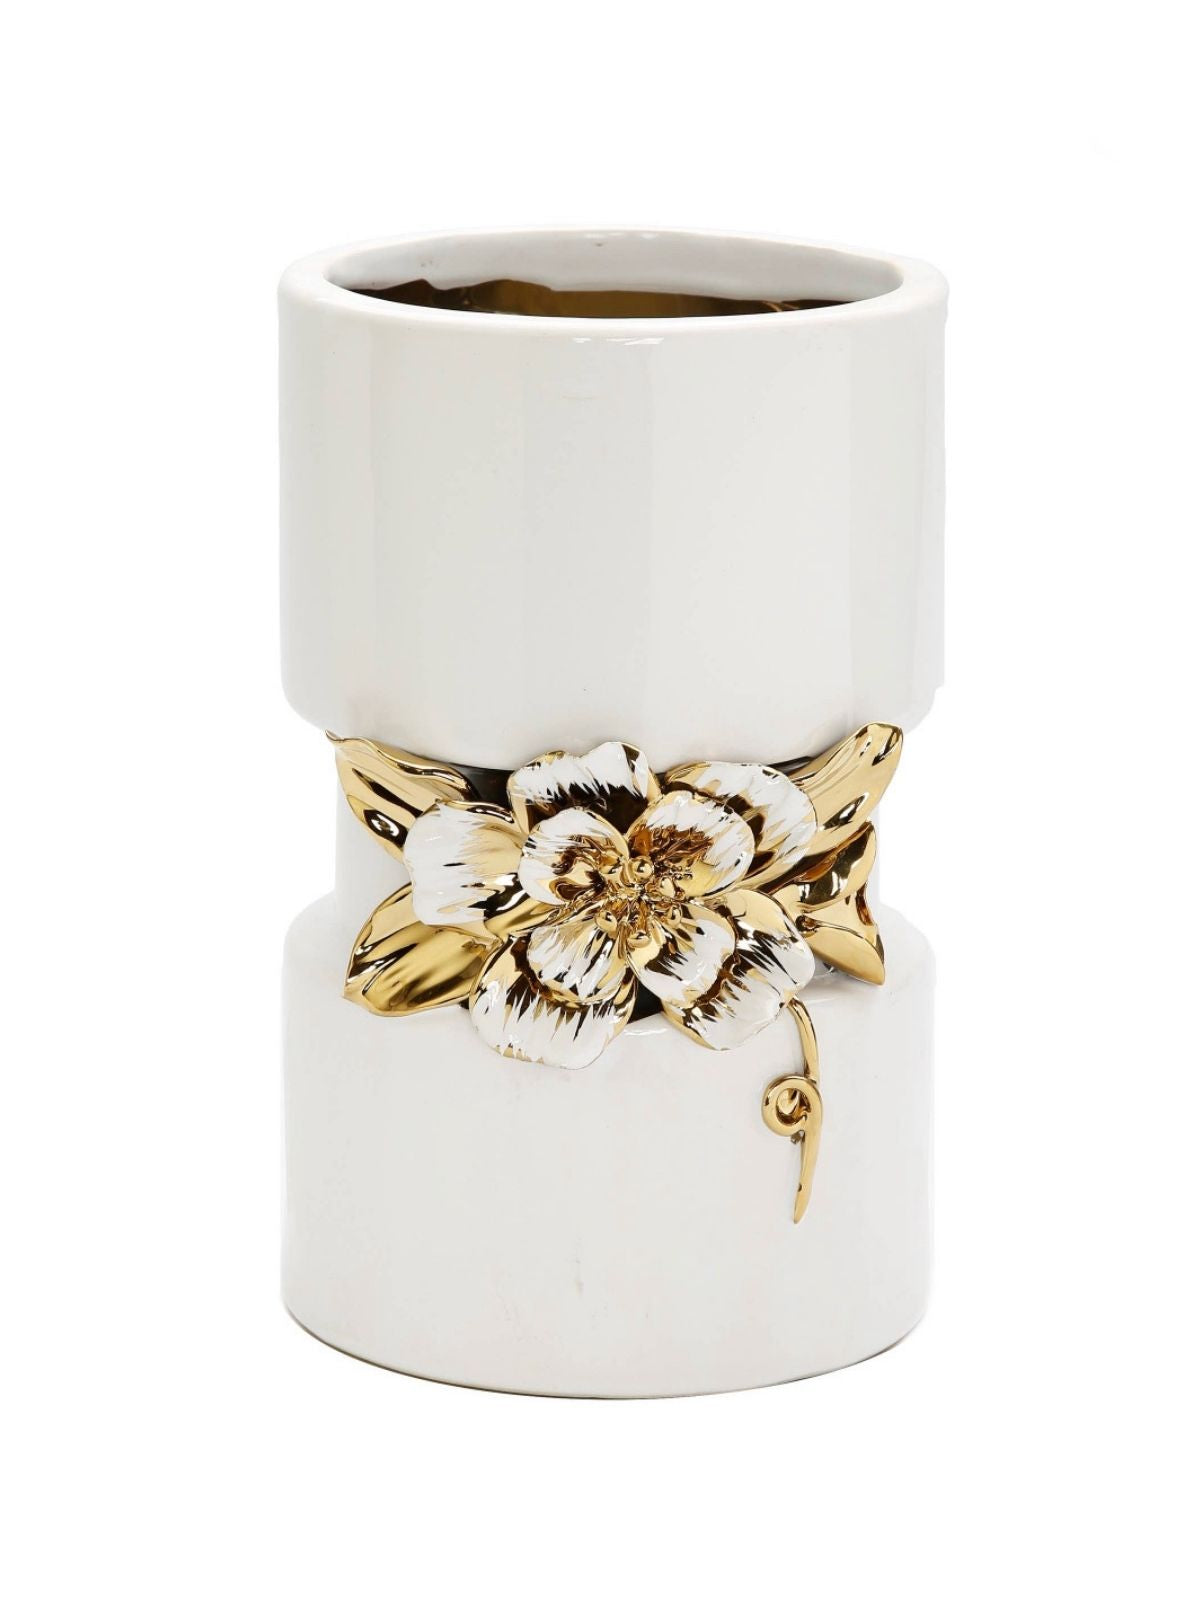 White Ceramic Decorative Vase With Luxury Gold 3D Floral Detailed Center - KYA Home Decor